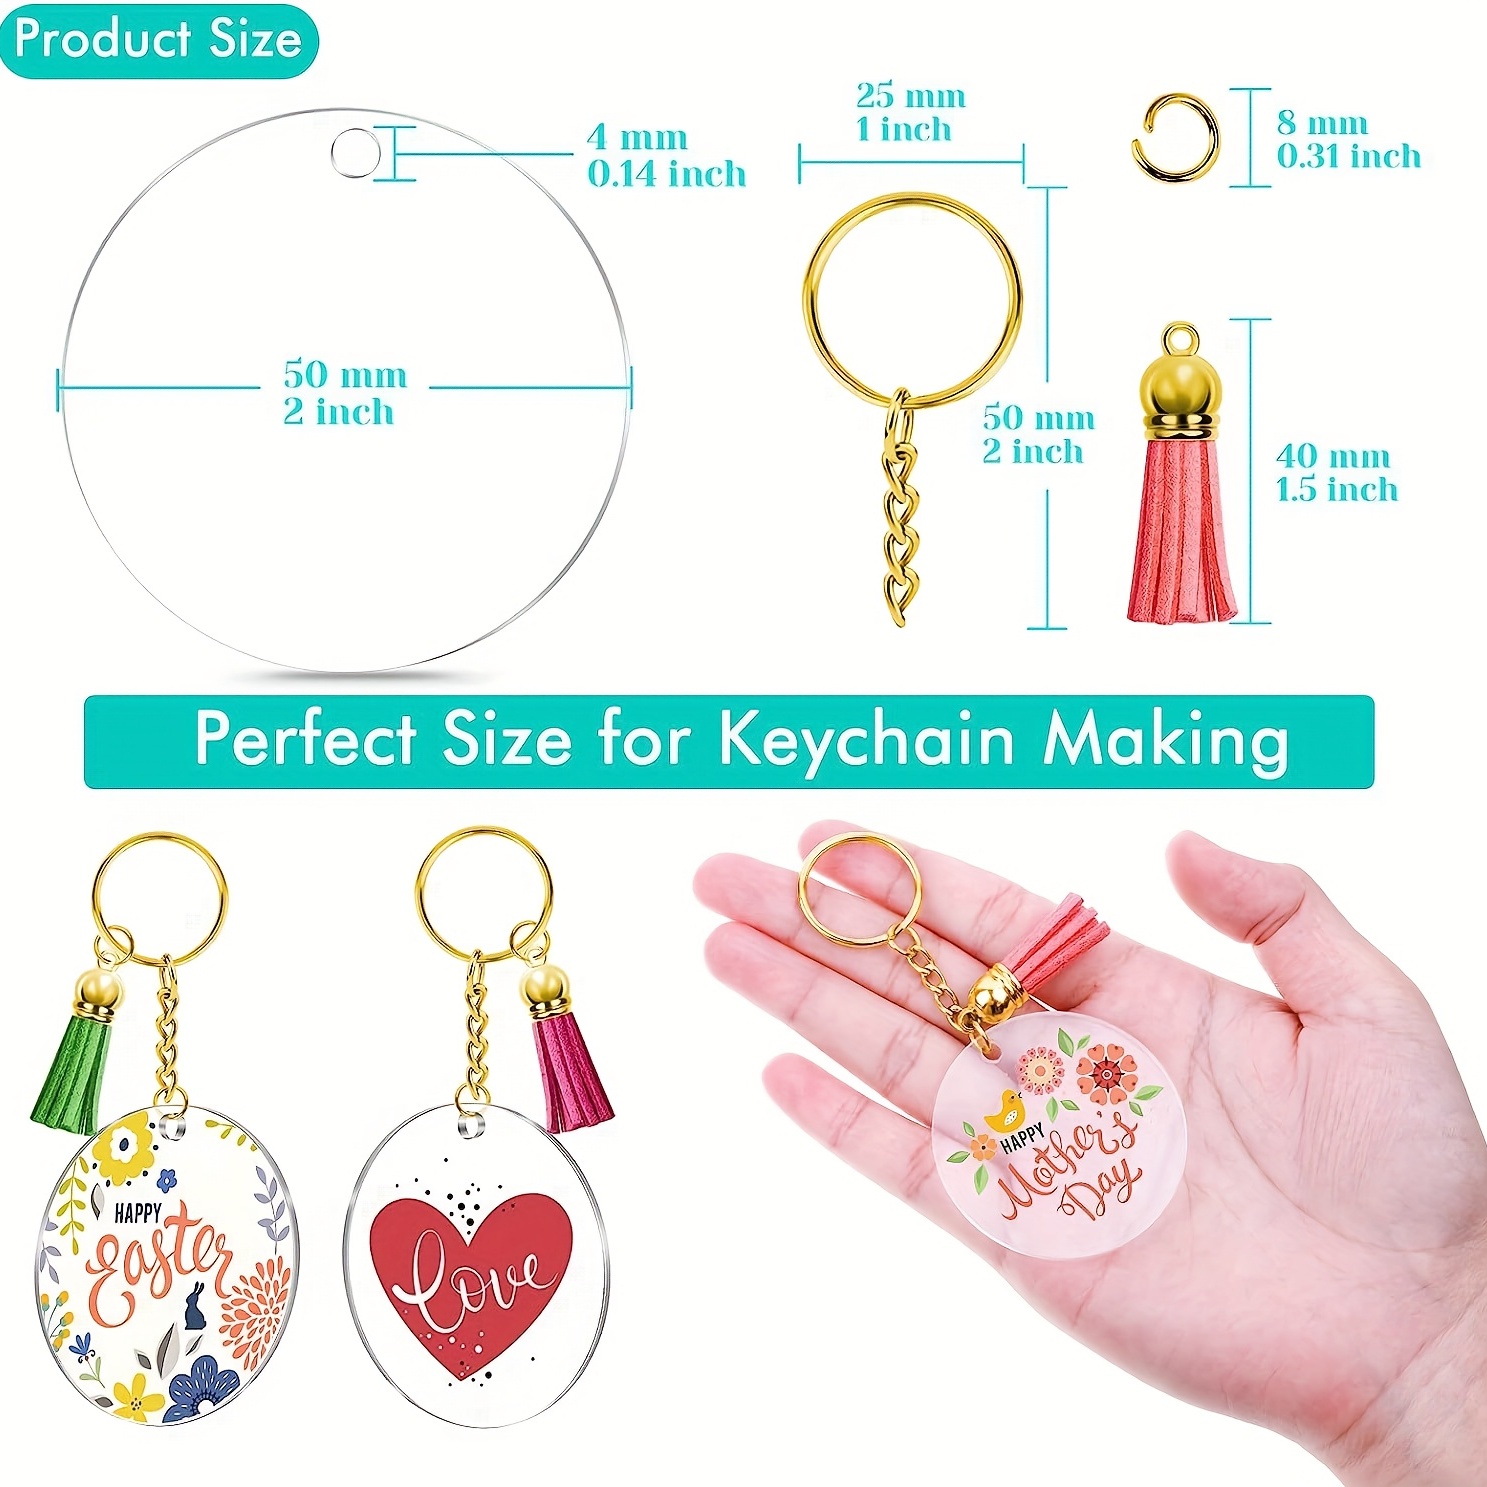 Acrylic Blanks Keychains for Ornament, 120 PCS Acrylic Keychains Set 30 PCS  Clear Blanks, Tassels, Key Chain, Jump Rings for Vinyl Crafting DIY